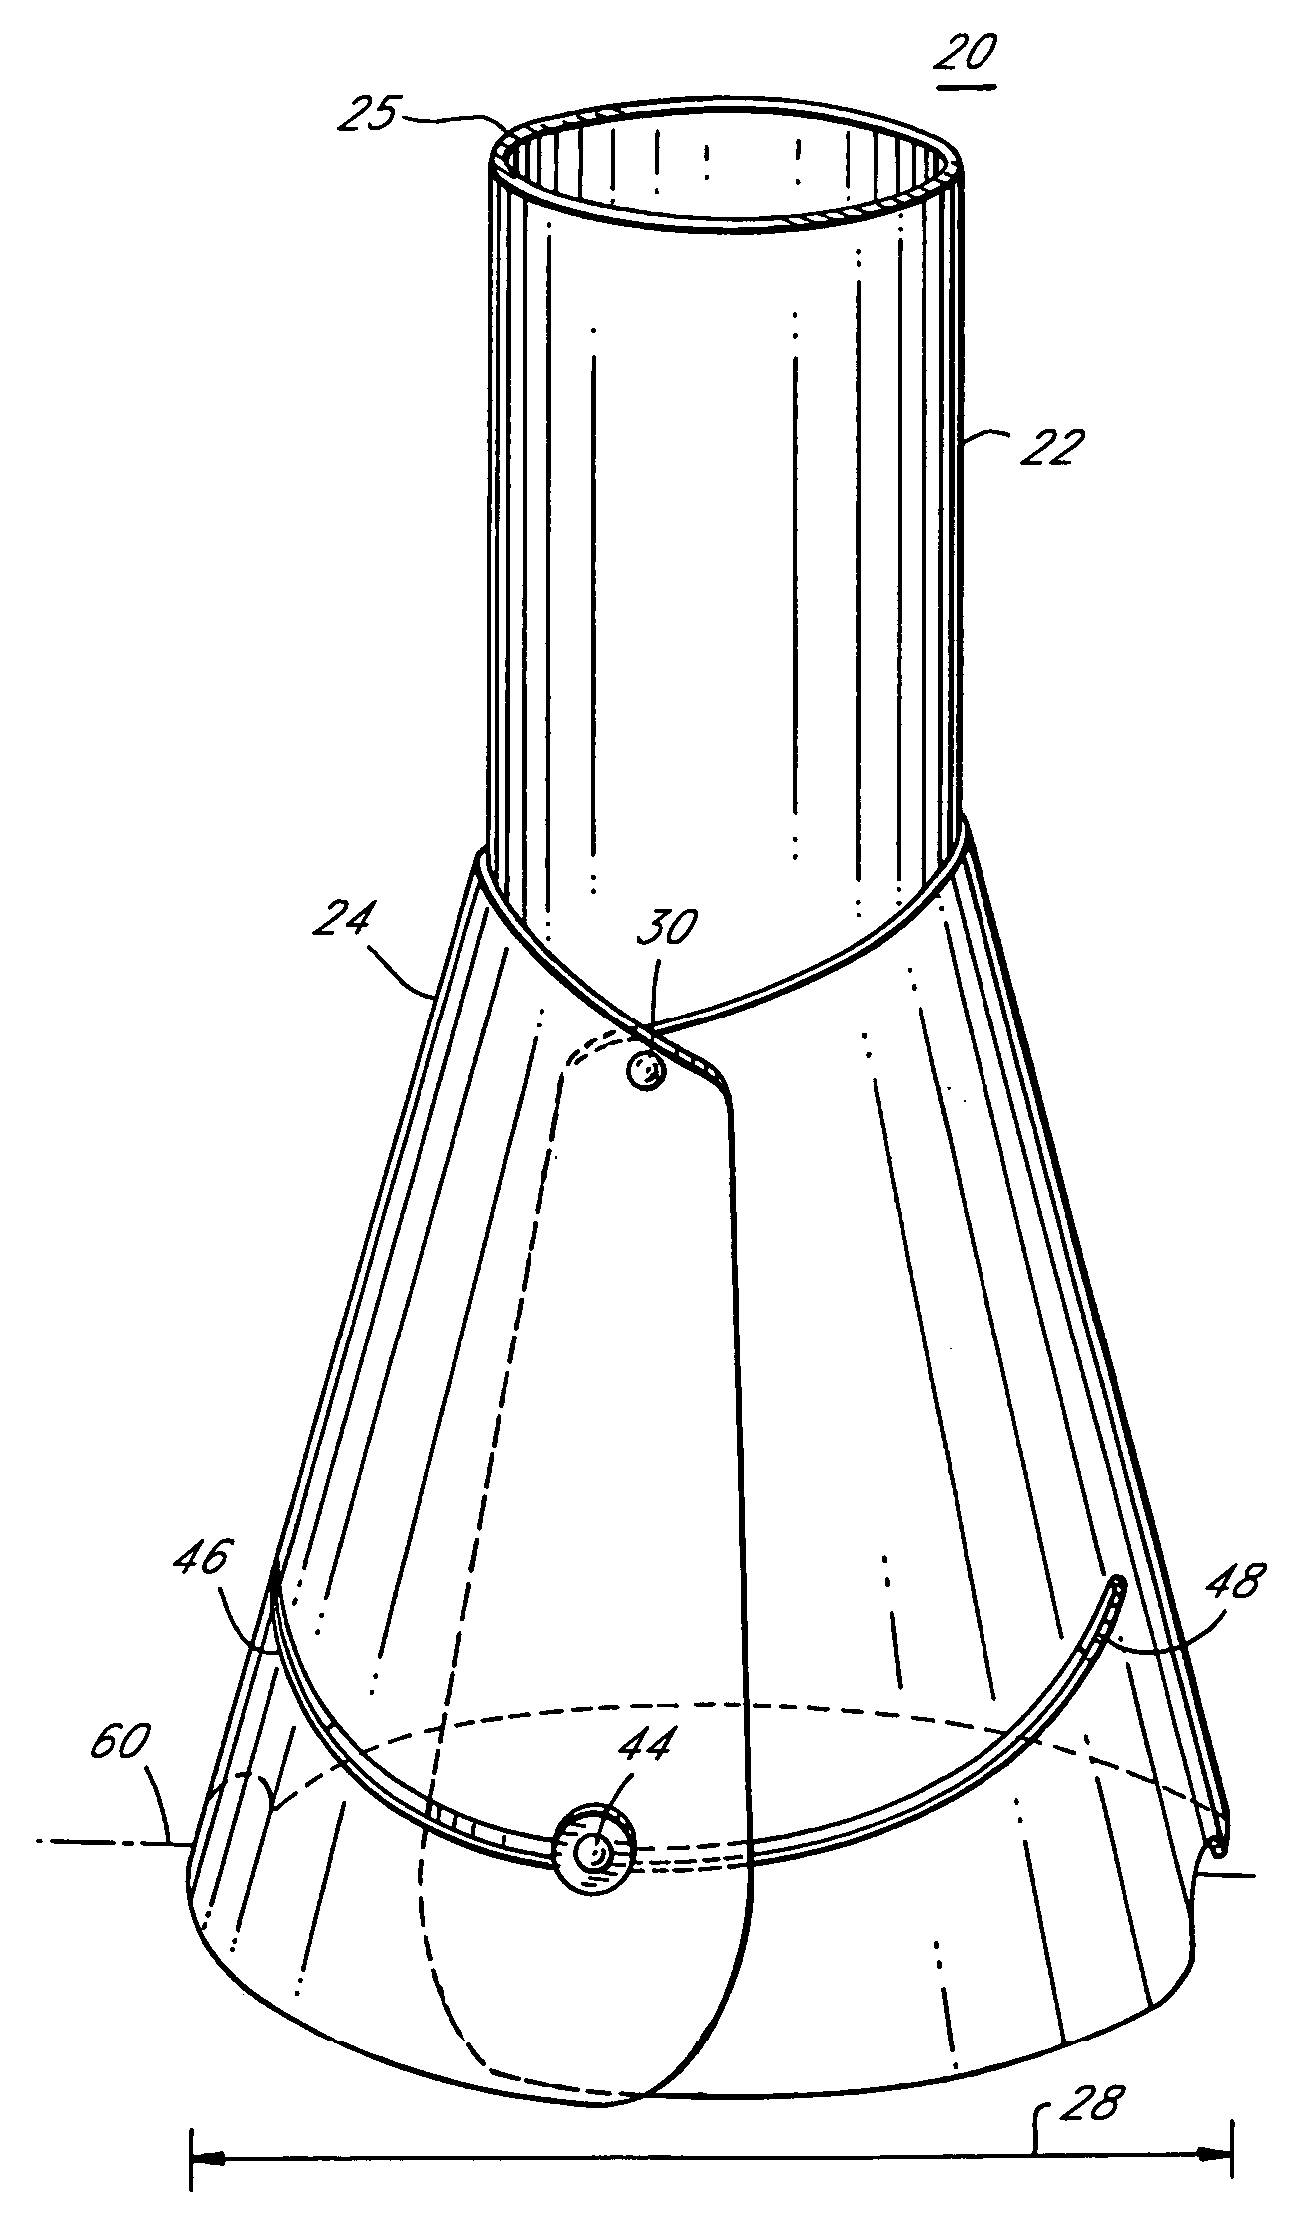 Access systems and methods for minimally invasive surgery